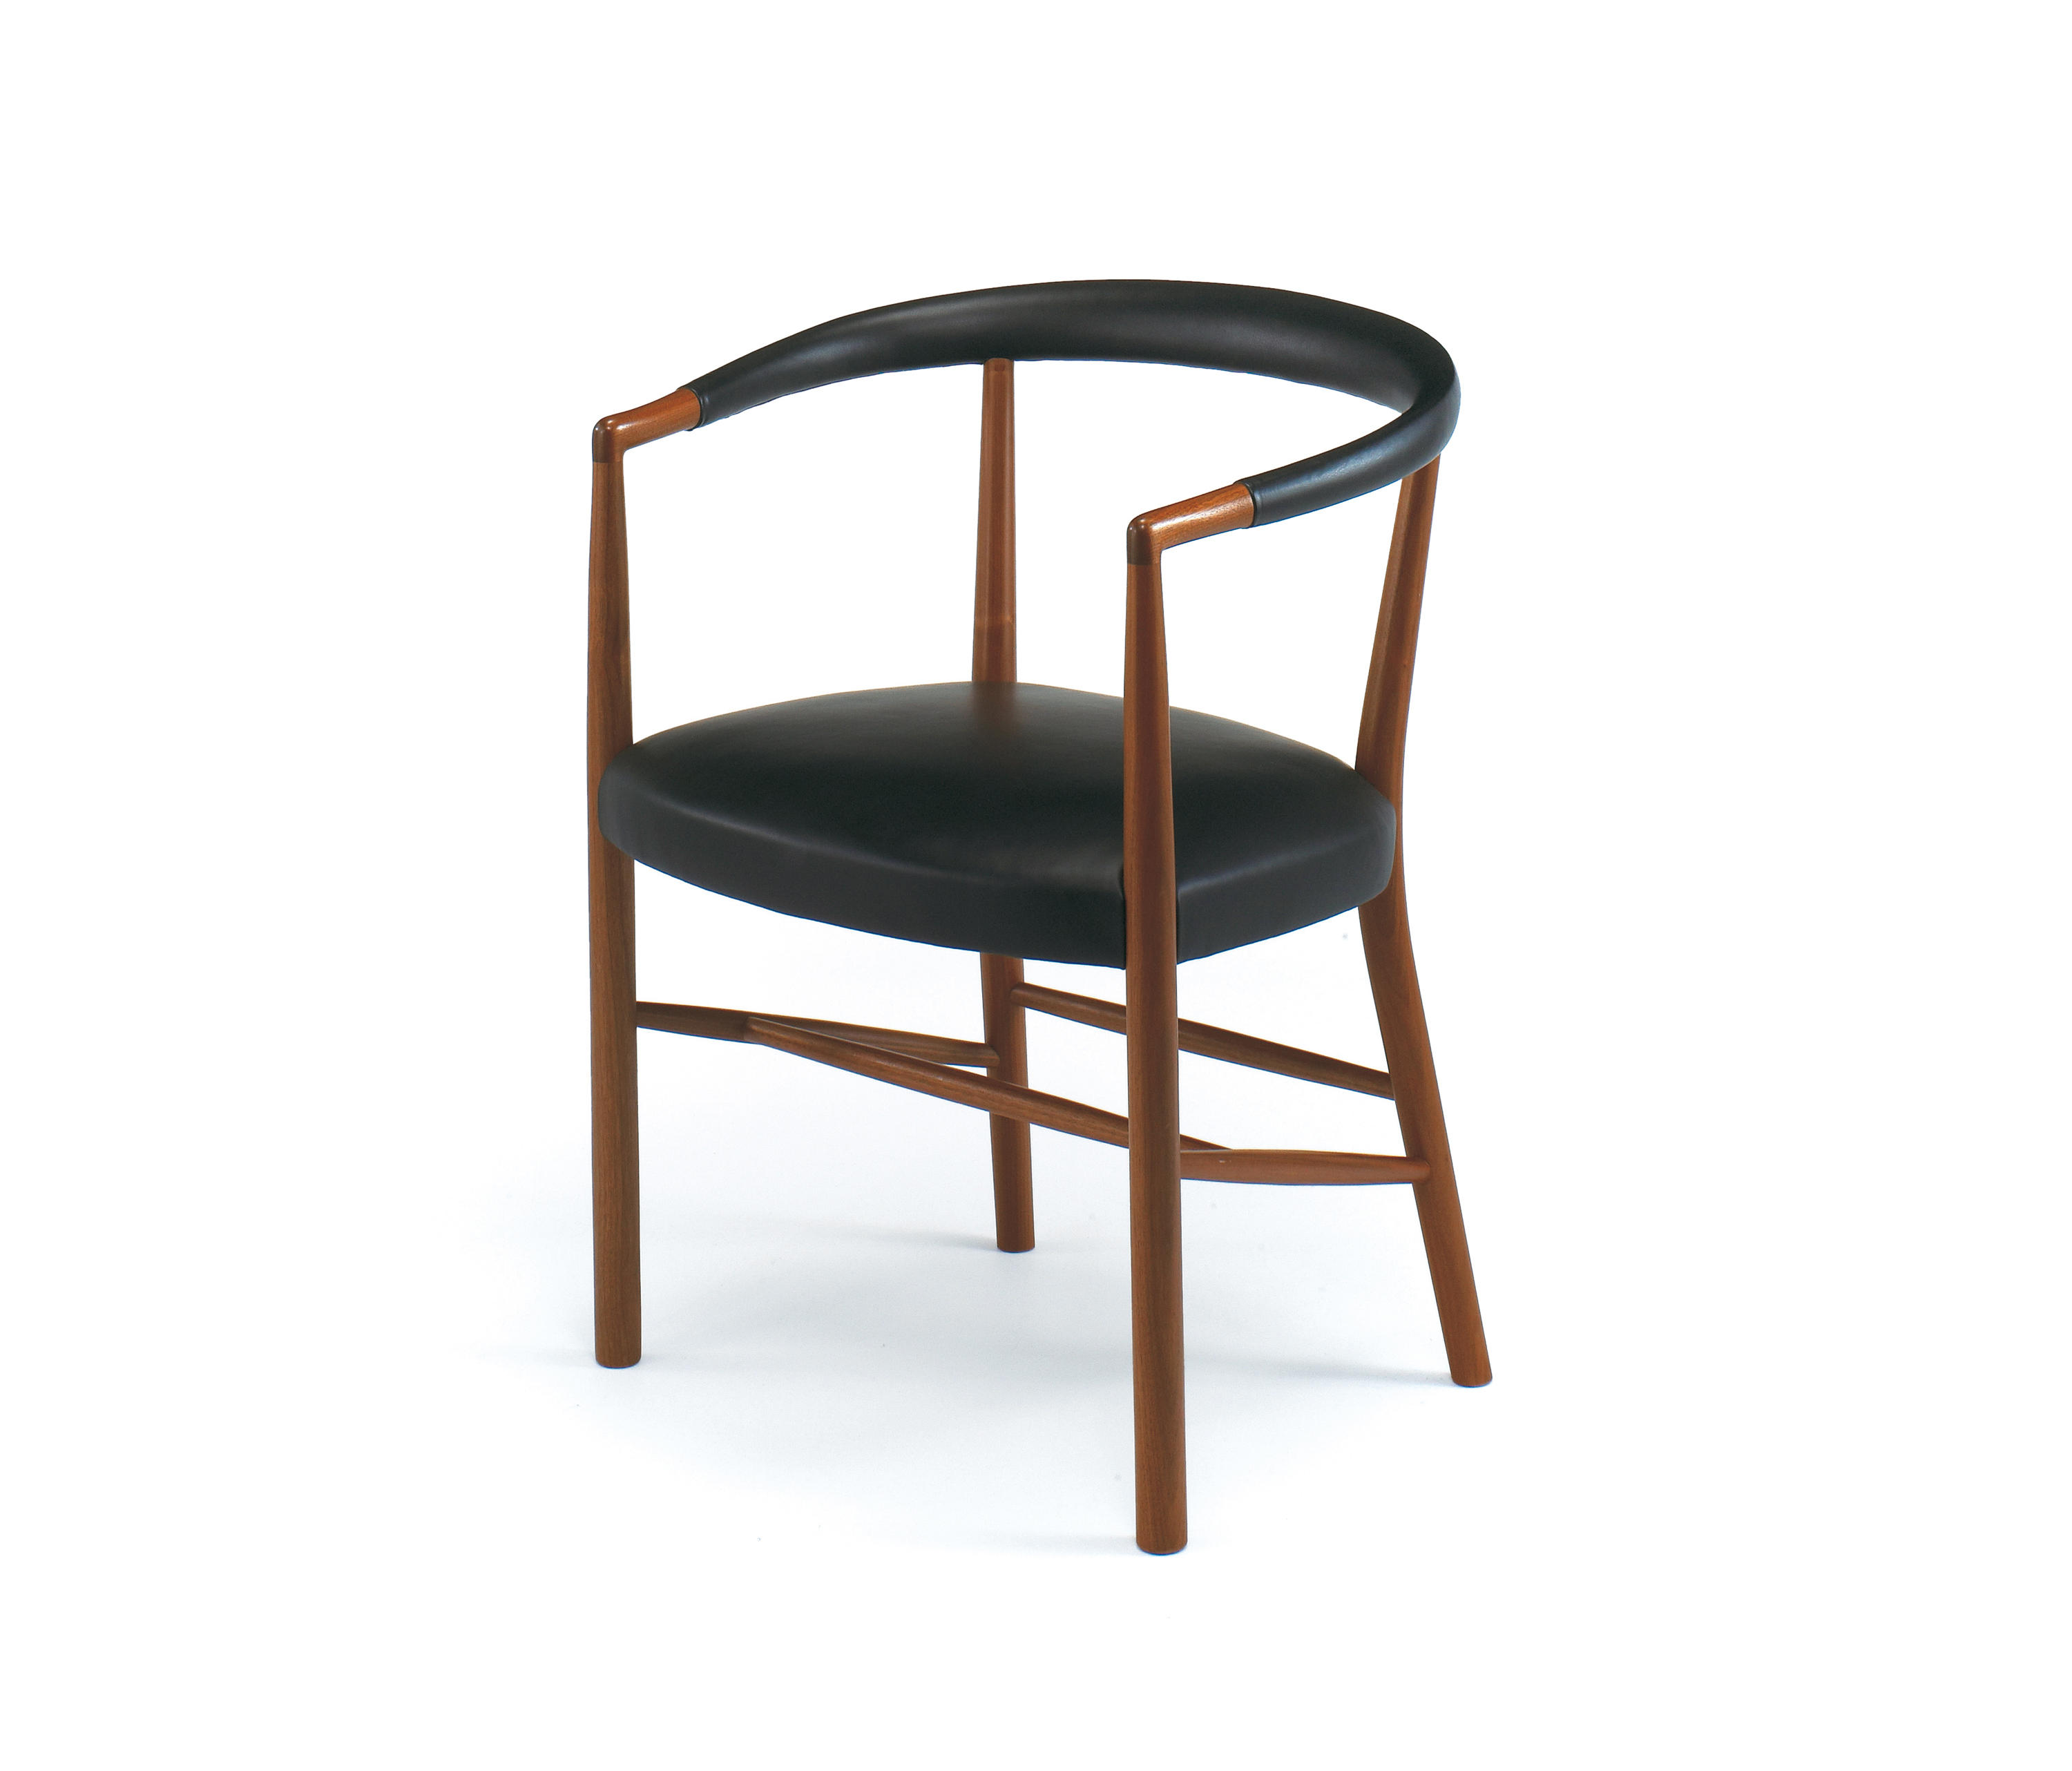 JK-03 CHAIR - Chairs from Kitani Japan Inc. | Architonic